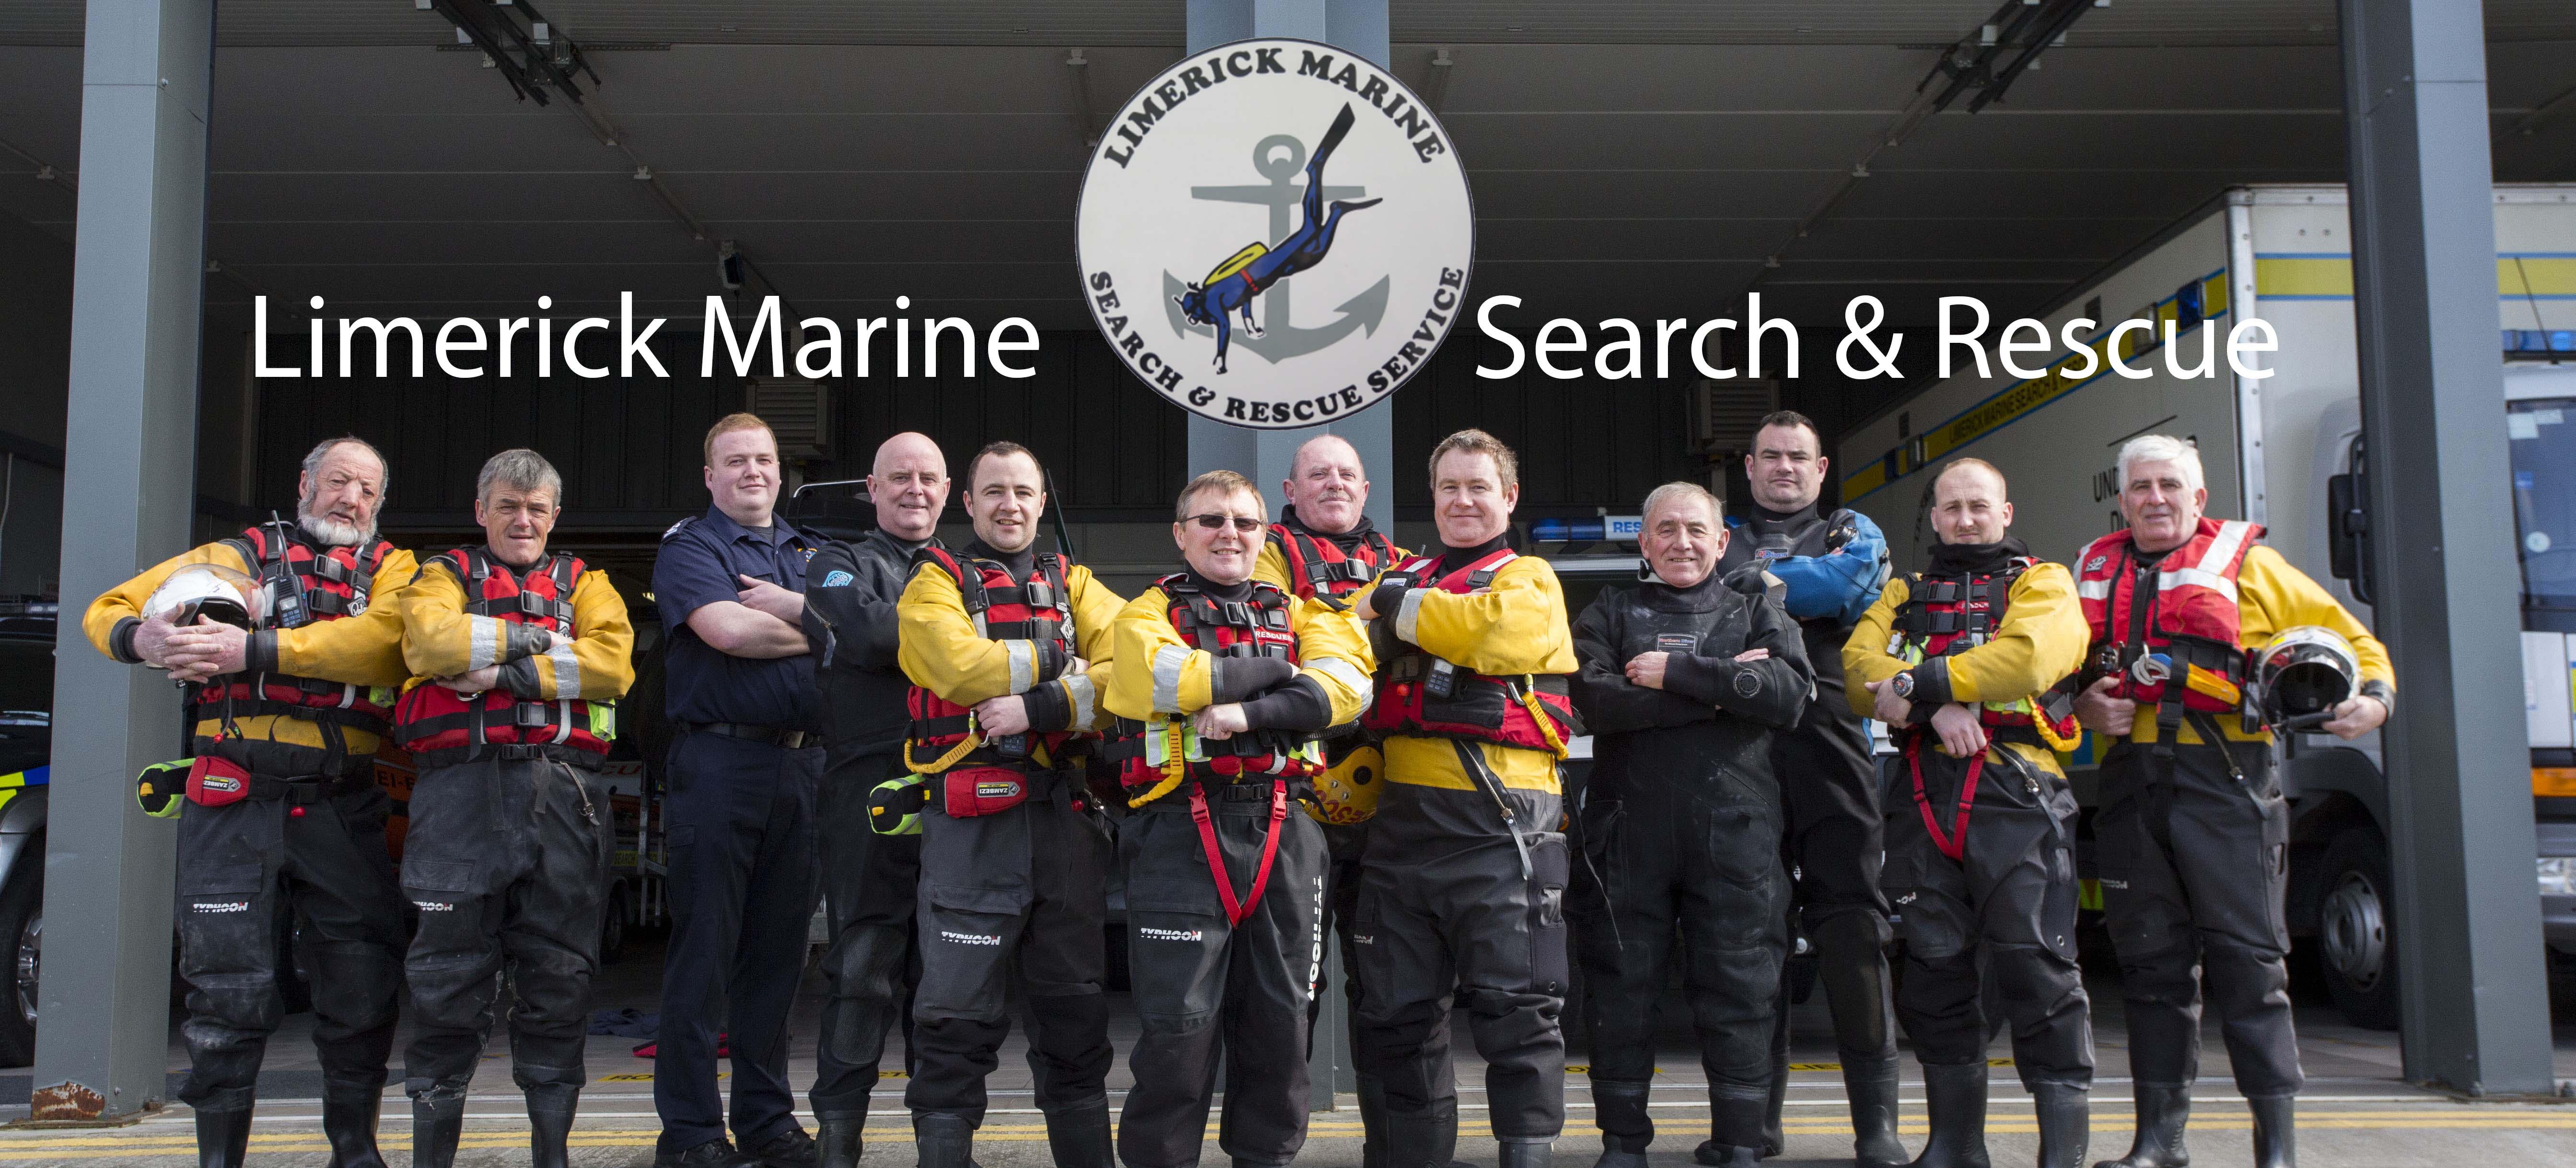 Limerick Marine Search and Rescue ask Limerick companies to support them on their 30th Anniversary